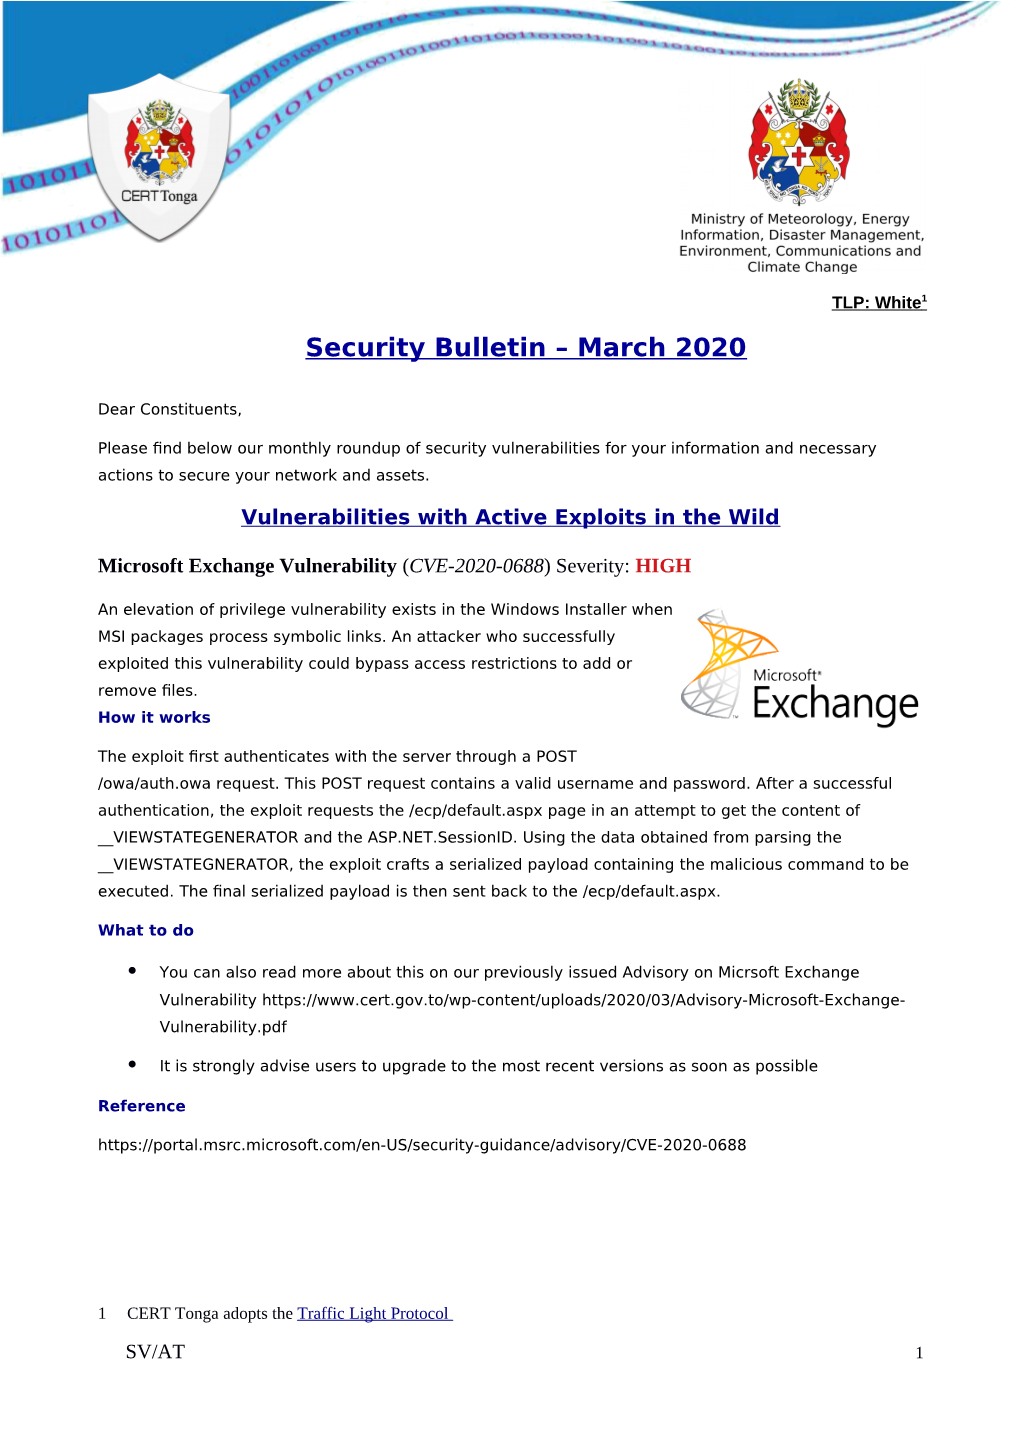 Security Bulletin – March 2020